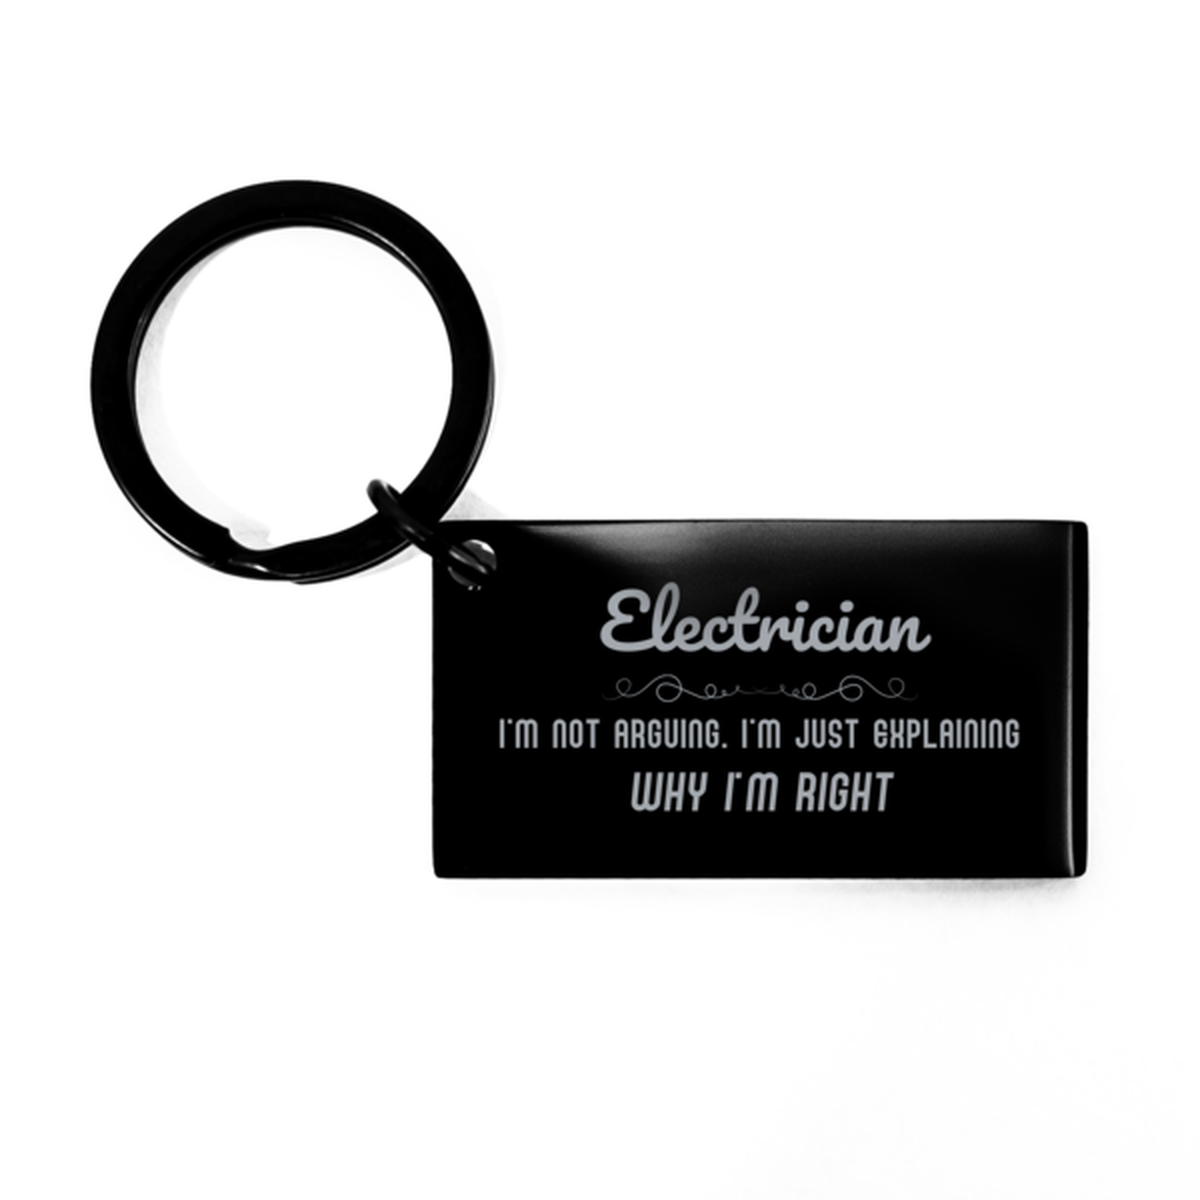 Electrician I'm not Arguing. I'm Just Explaining Why I'm RIGHT Keychain, Funny Saying Quote Electrician Gifts For Electrician Graduation Birthday Christmas Gifts for Men Women Coworker